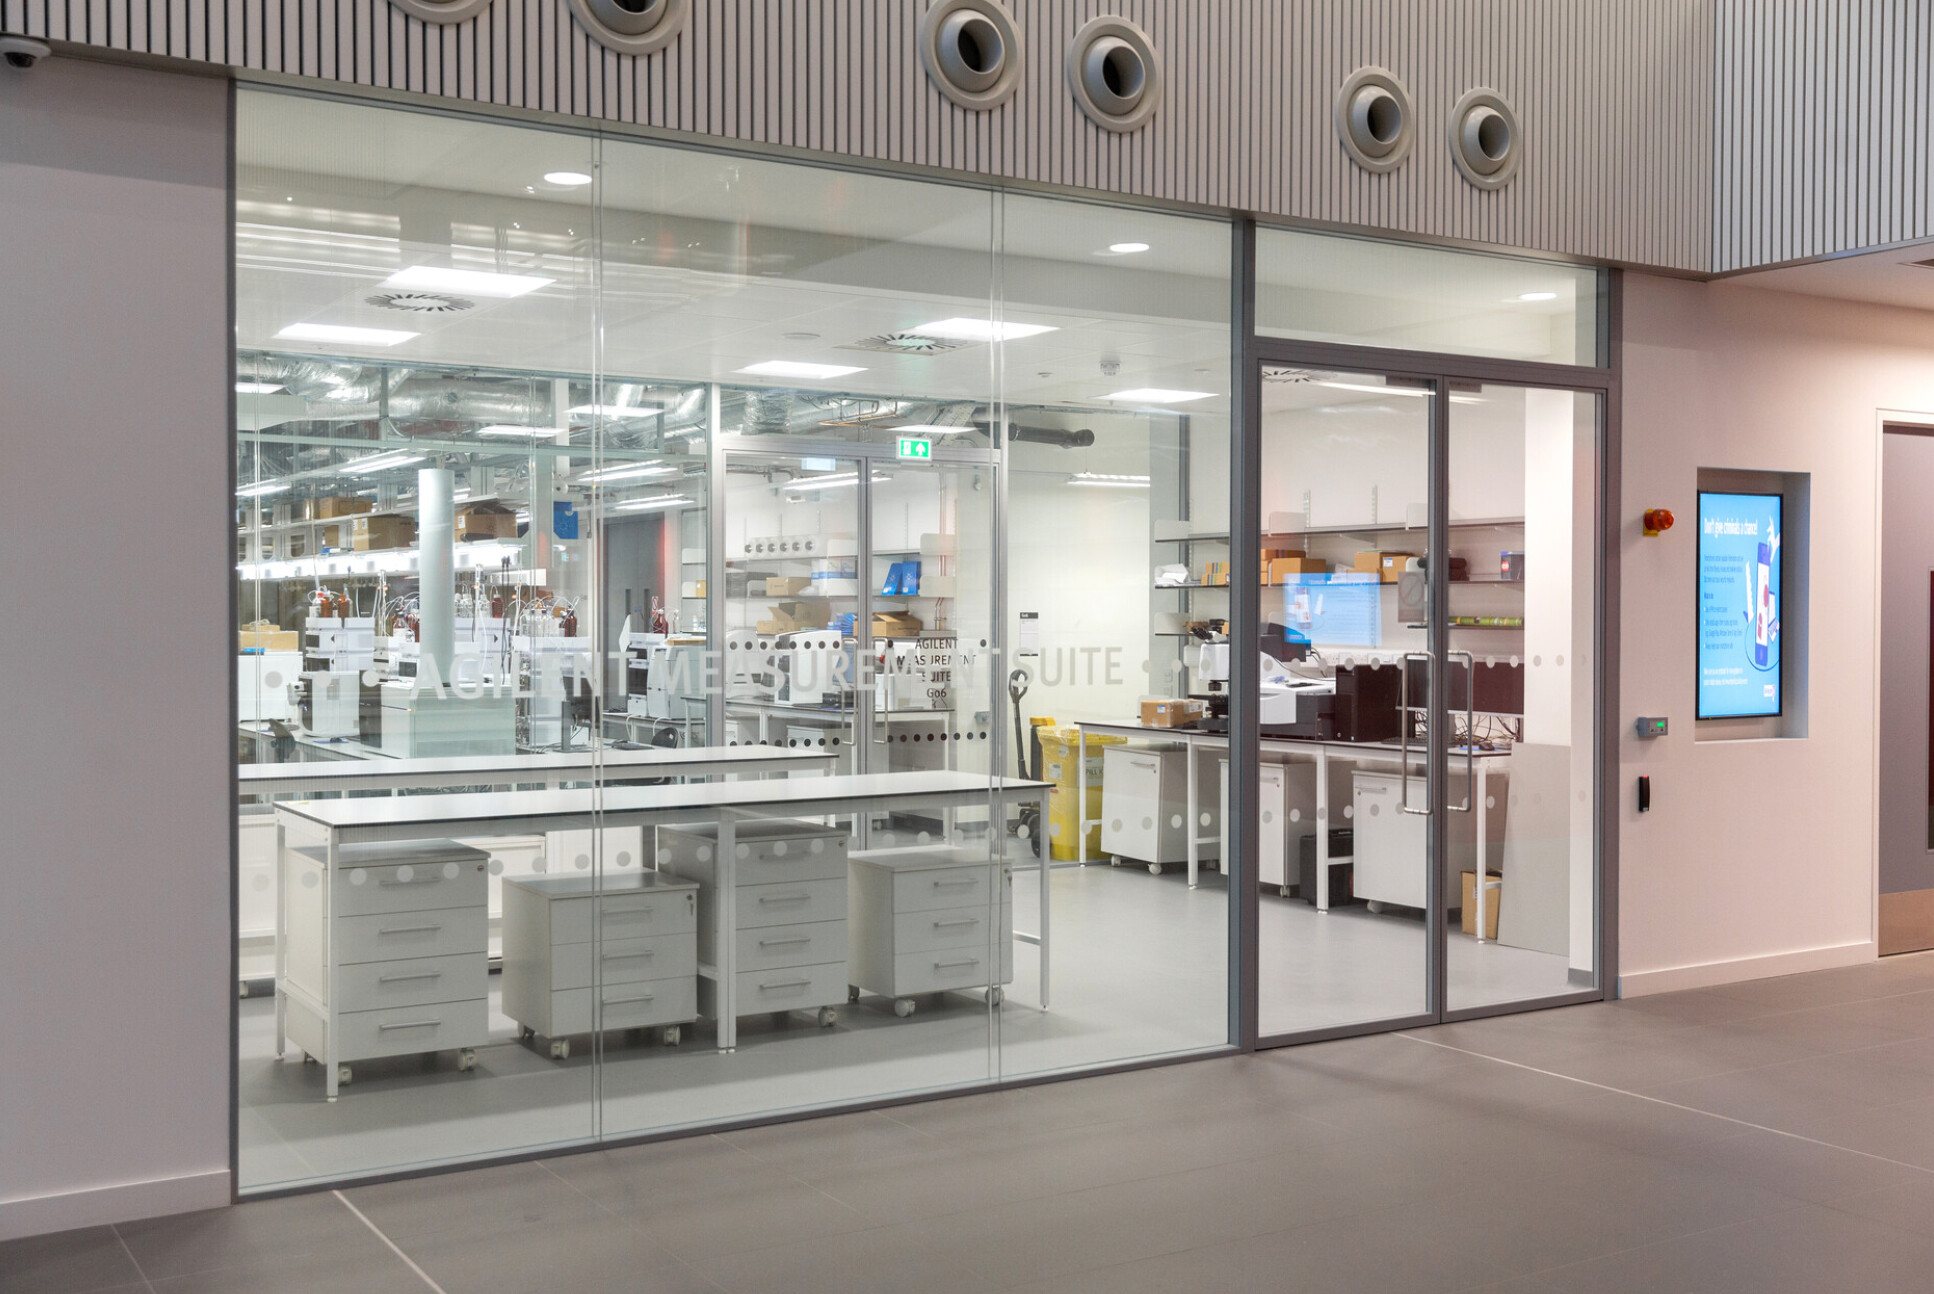 The Agilent Measurement Suite seen from the lobby of the Molecular Sciences Research Hub